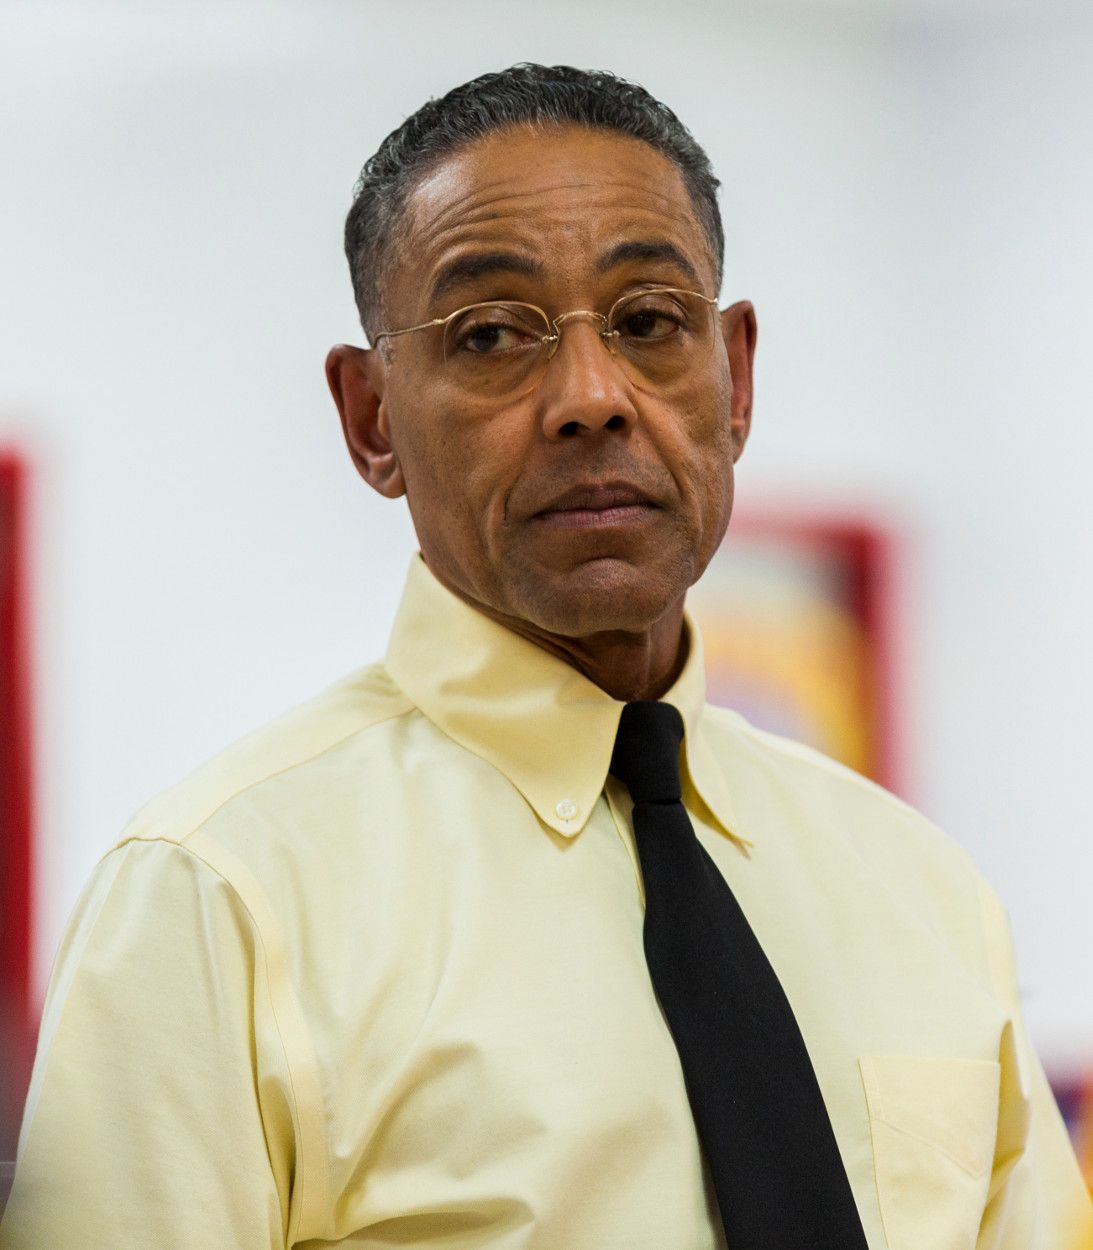 Giancarlo Esposito As Gus Fring On Better Call Saul